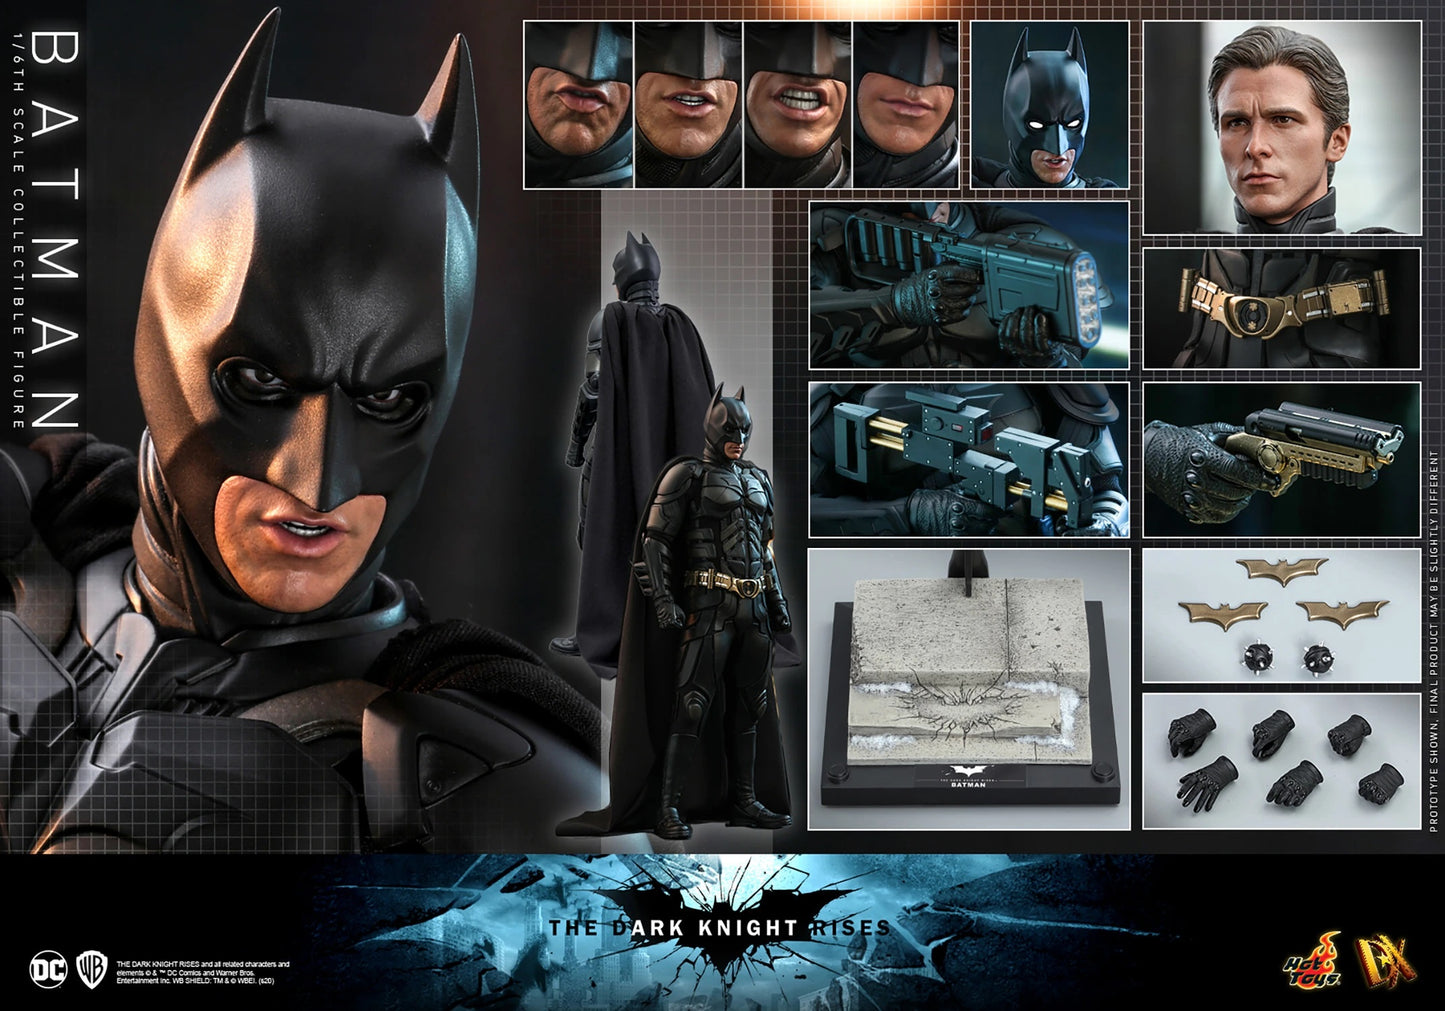 HOT TOYS THE DARK KNIGHT RISES 1/6TH SCALE BATMAN DX19 - Anotoys Collectibles